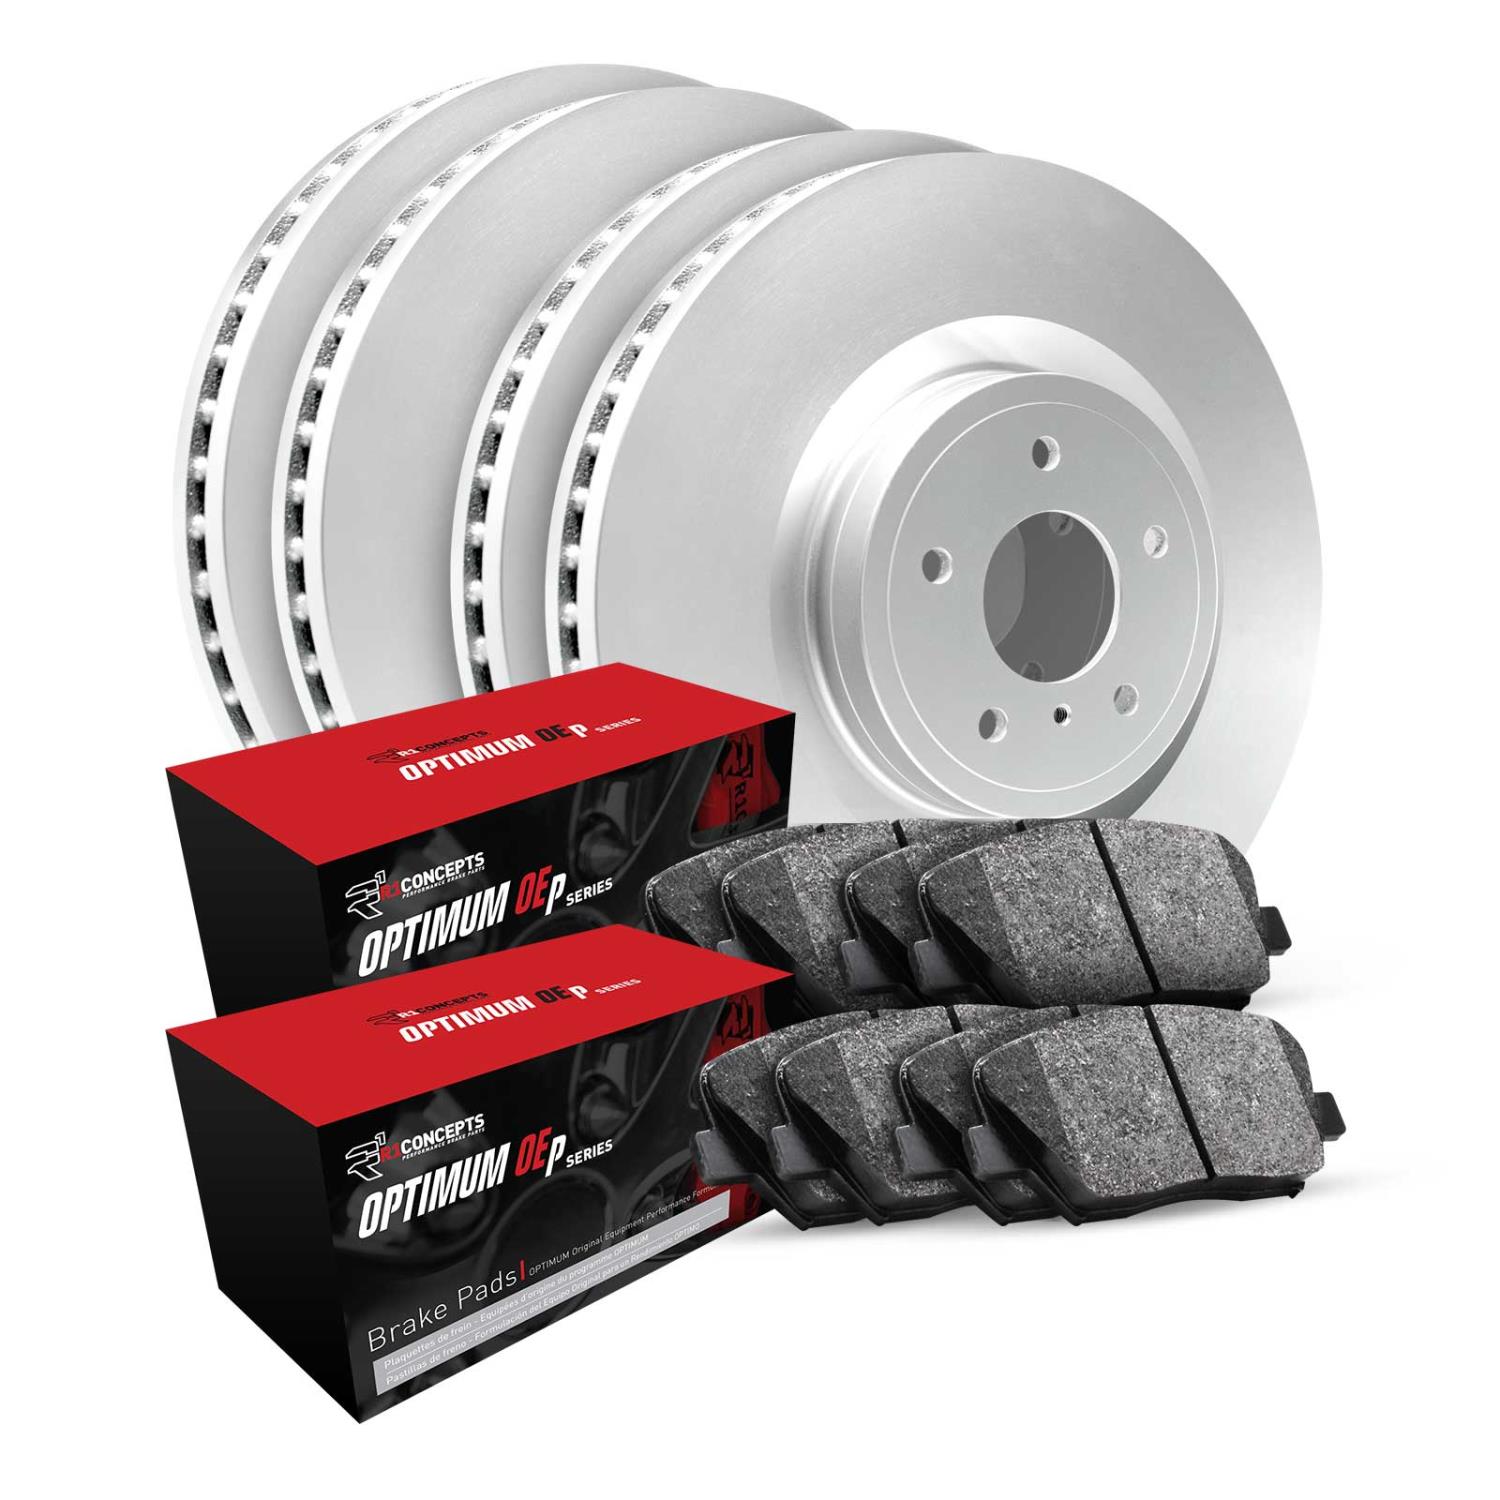 GEO-Carbon Brake Rotor Set w/Optimum OE Pads, 2002-2006 Fits Multiple Makes/Models, Position: Front & Rear